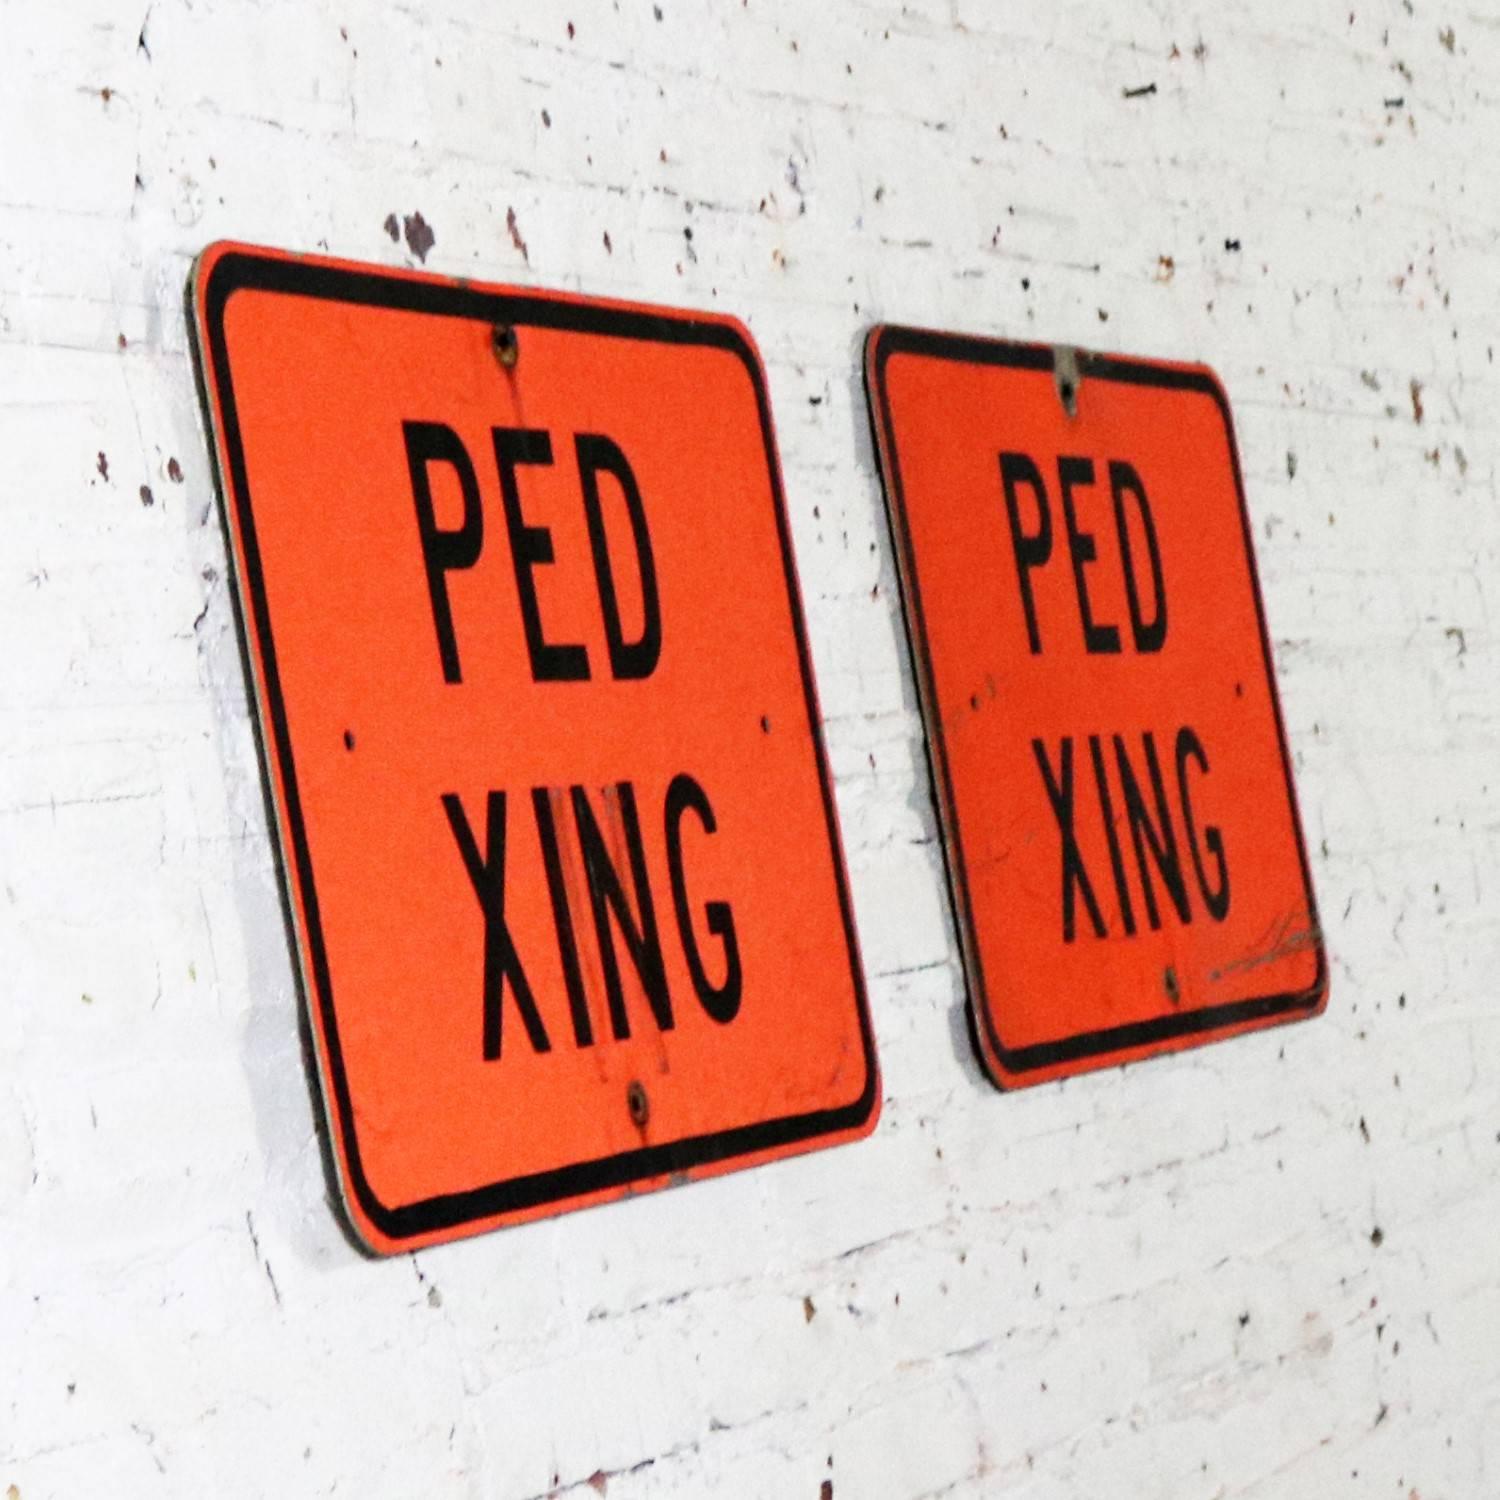 North American Vintage Ped Xing Florescent Orange Metal Traffic Signs For Sale